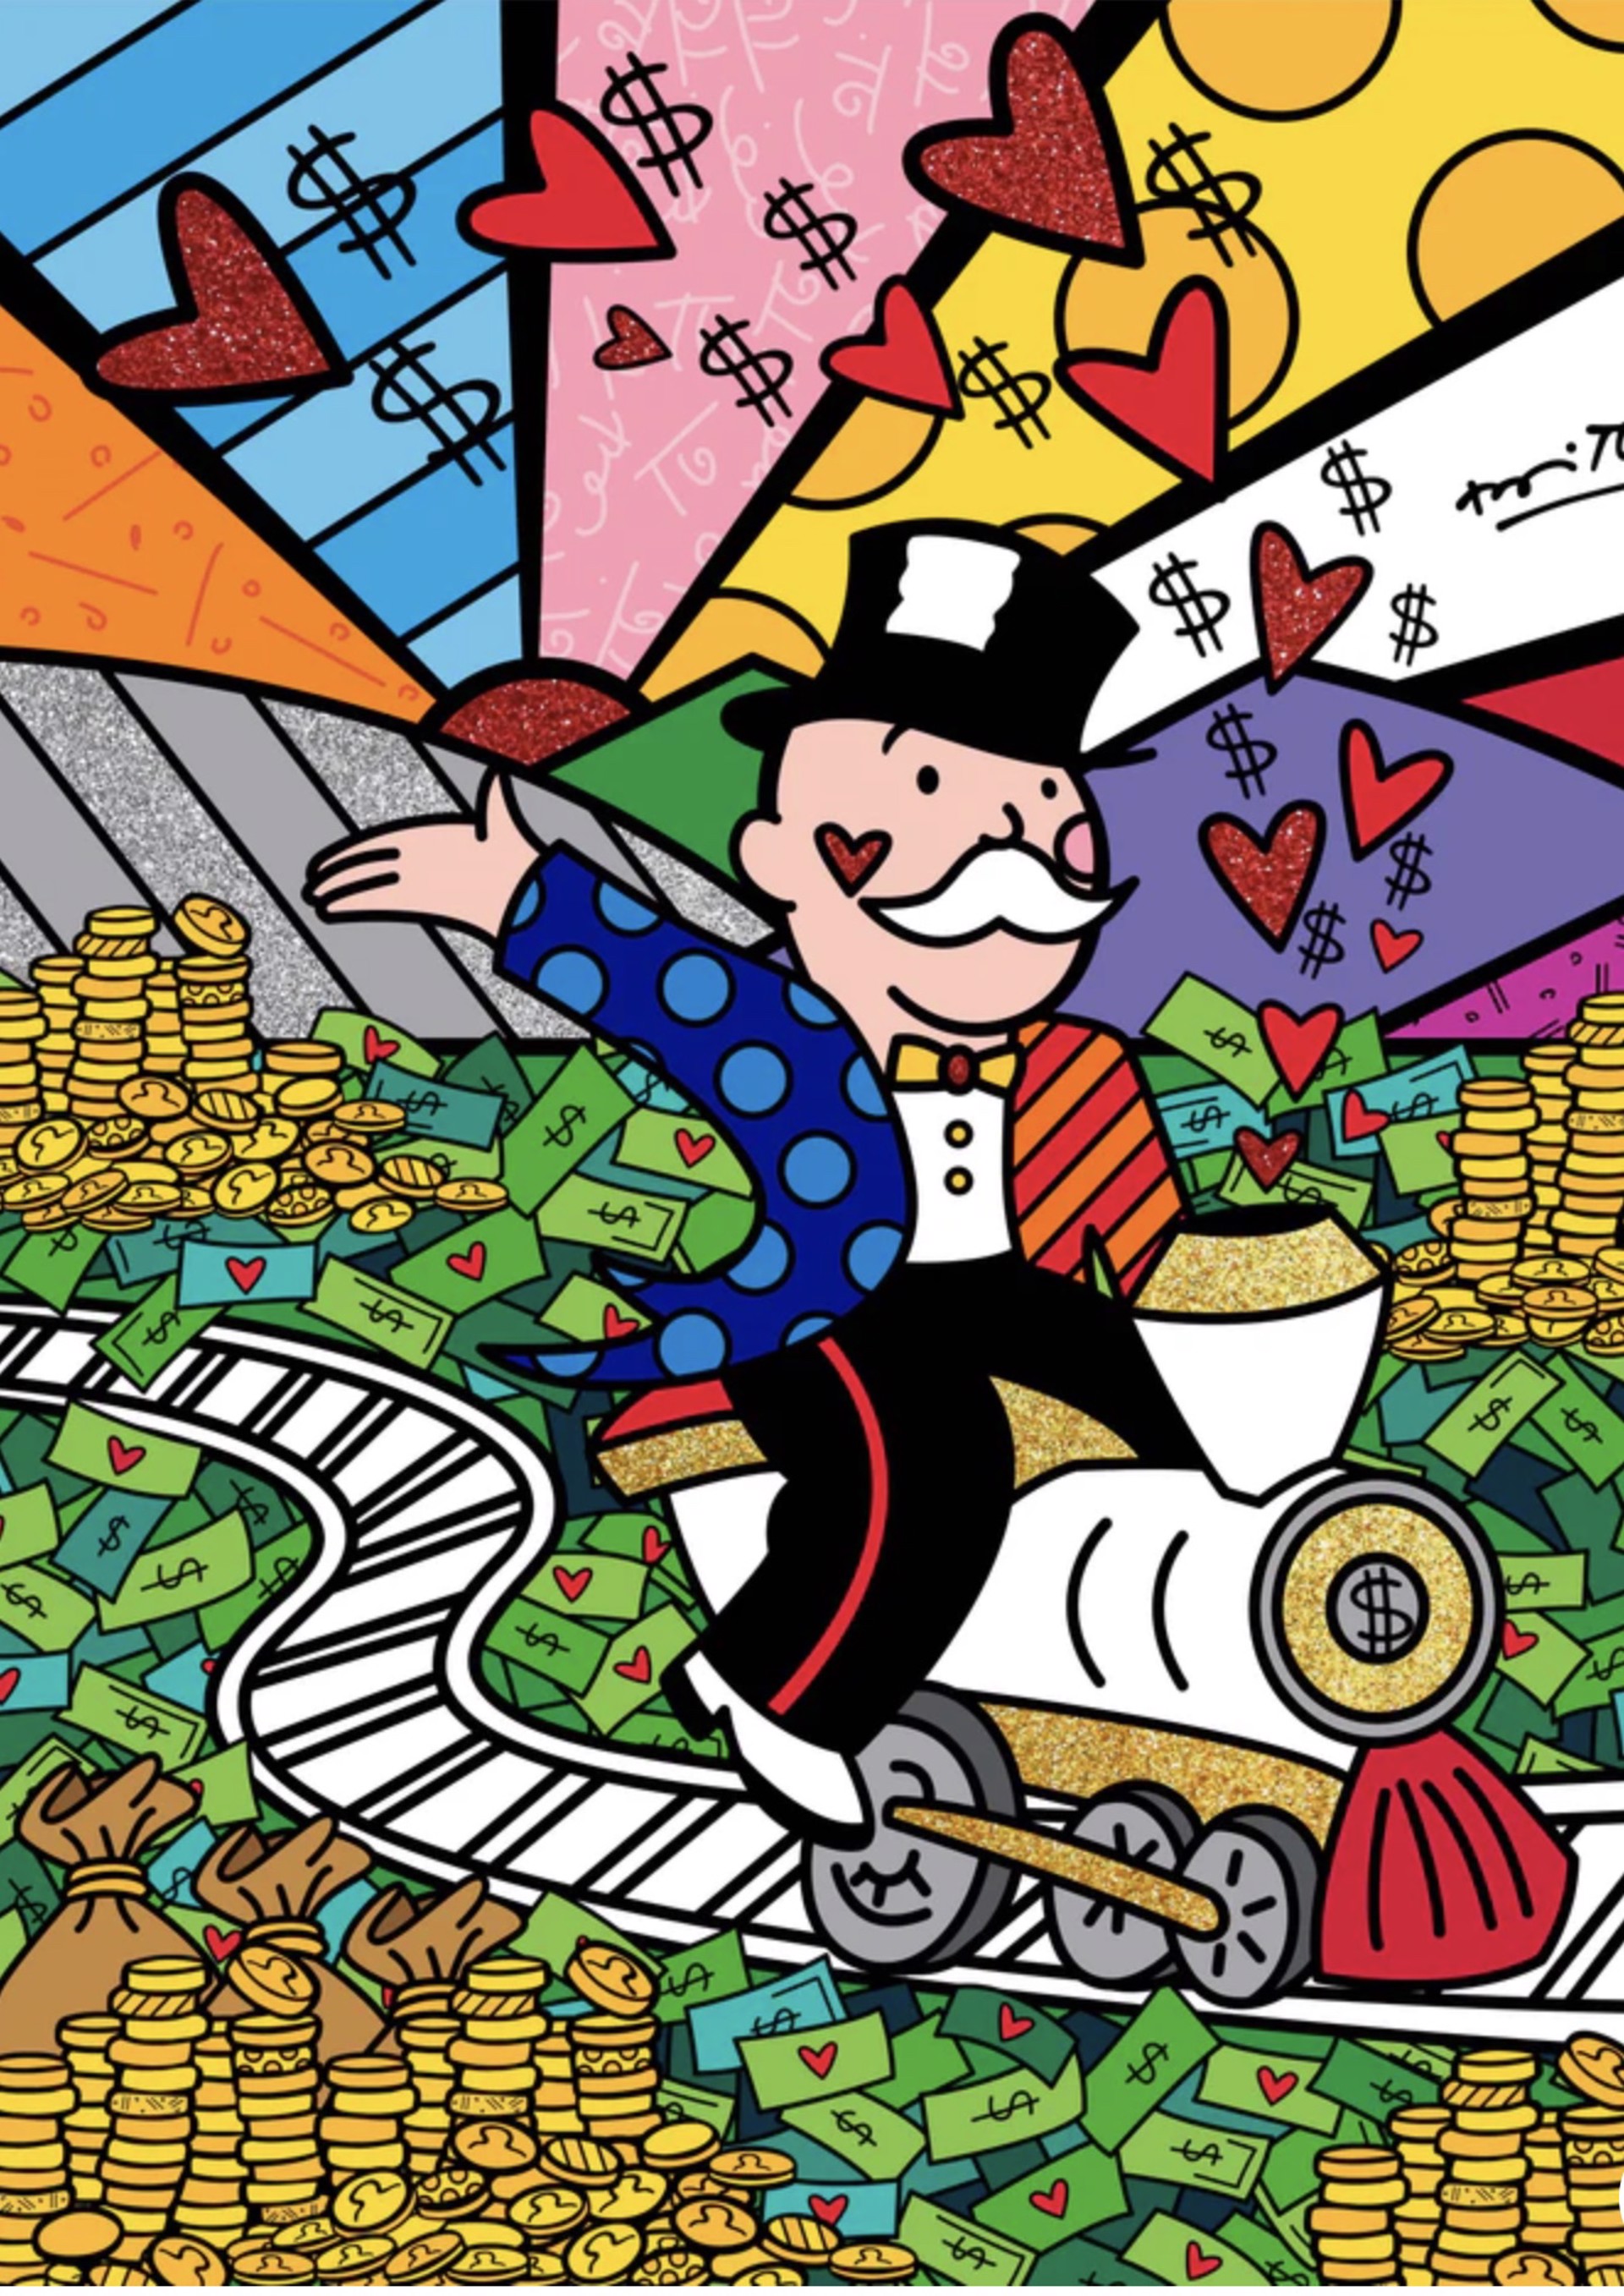 ON THE RIGHT TRACK (MONOPOLY) by Romero Britto